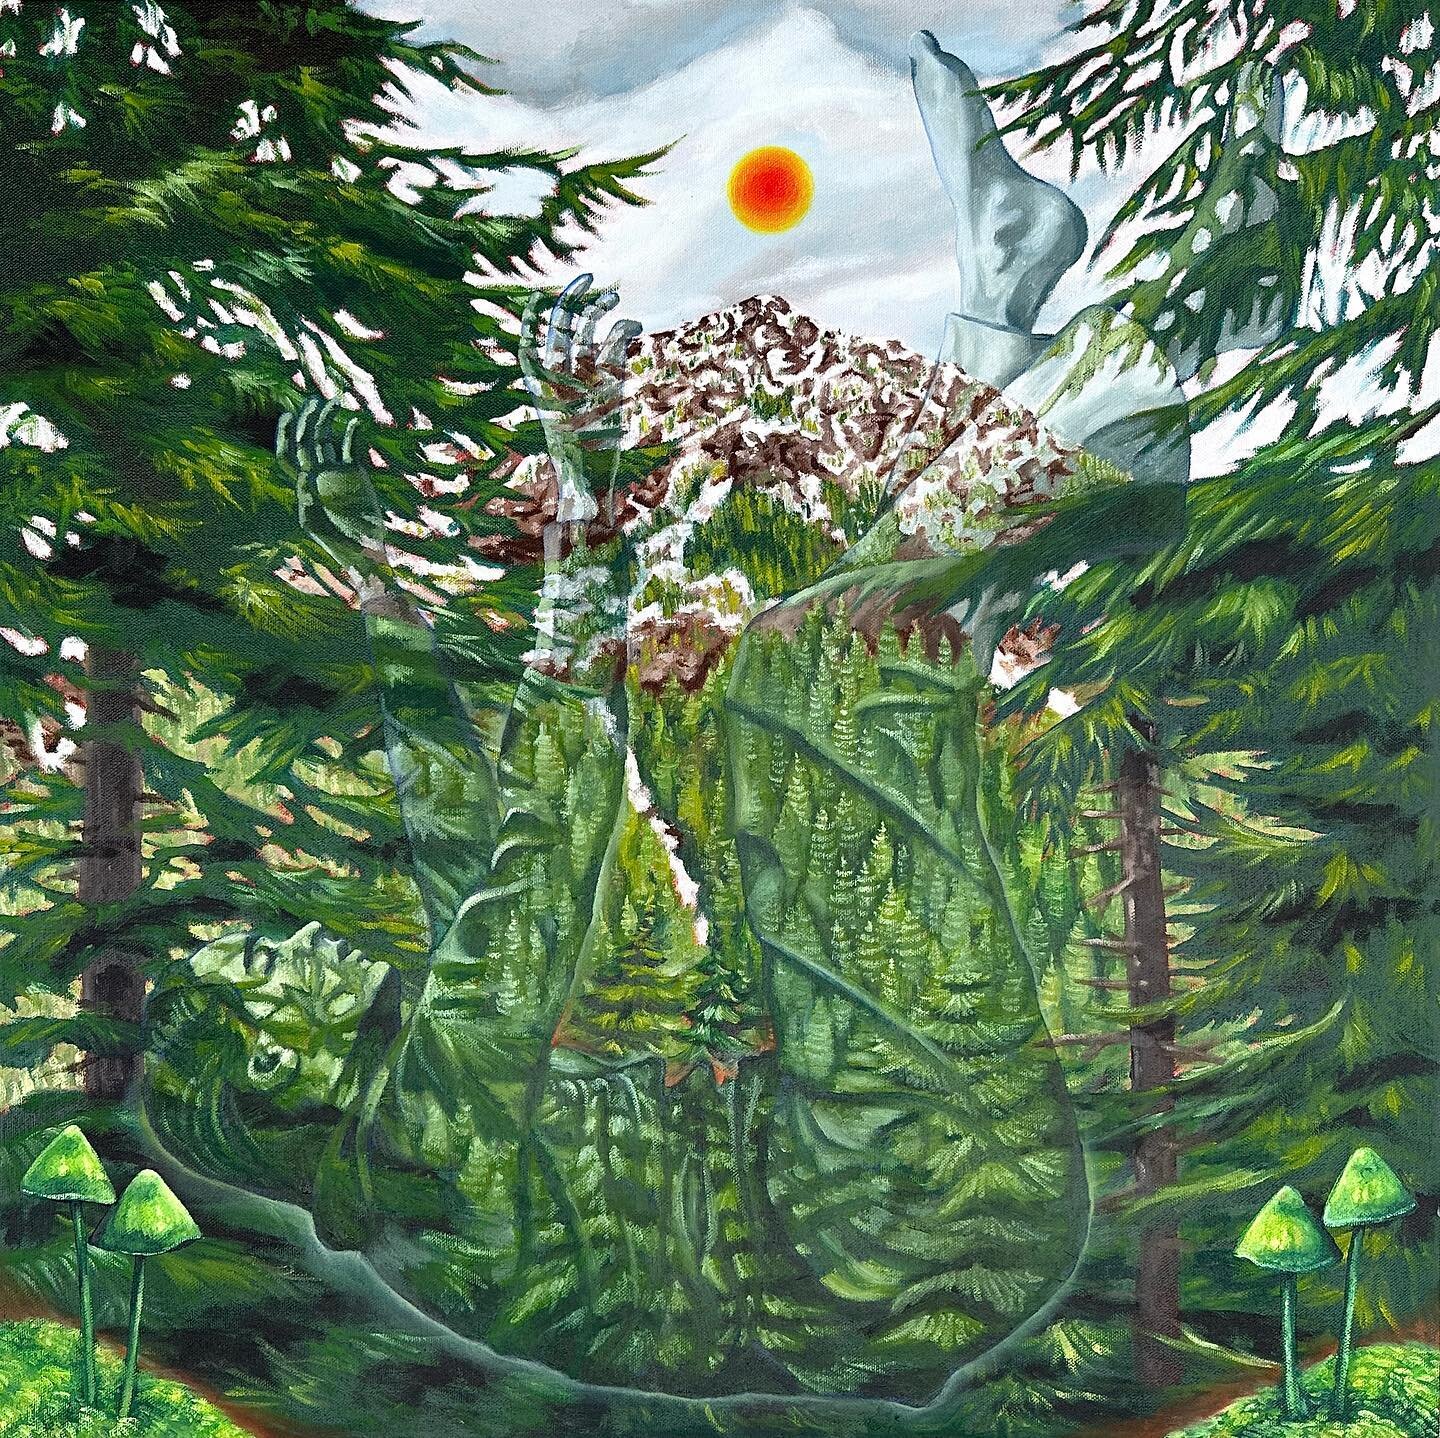 Sometimes it takes a really good fall to realize where we stand. 

#falling #transparent #oilpainting #oiloncanvas #pnwarts #pnwartisan #olympiaart #olympiaartist #washingtonstateartist #pnwnature #landscapepainting #portaiture #trippyartworks #tripp